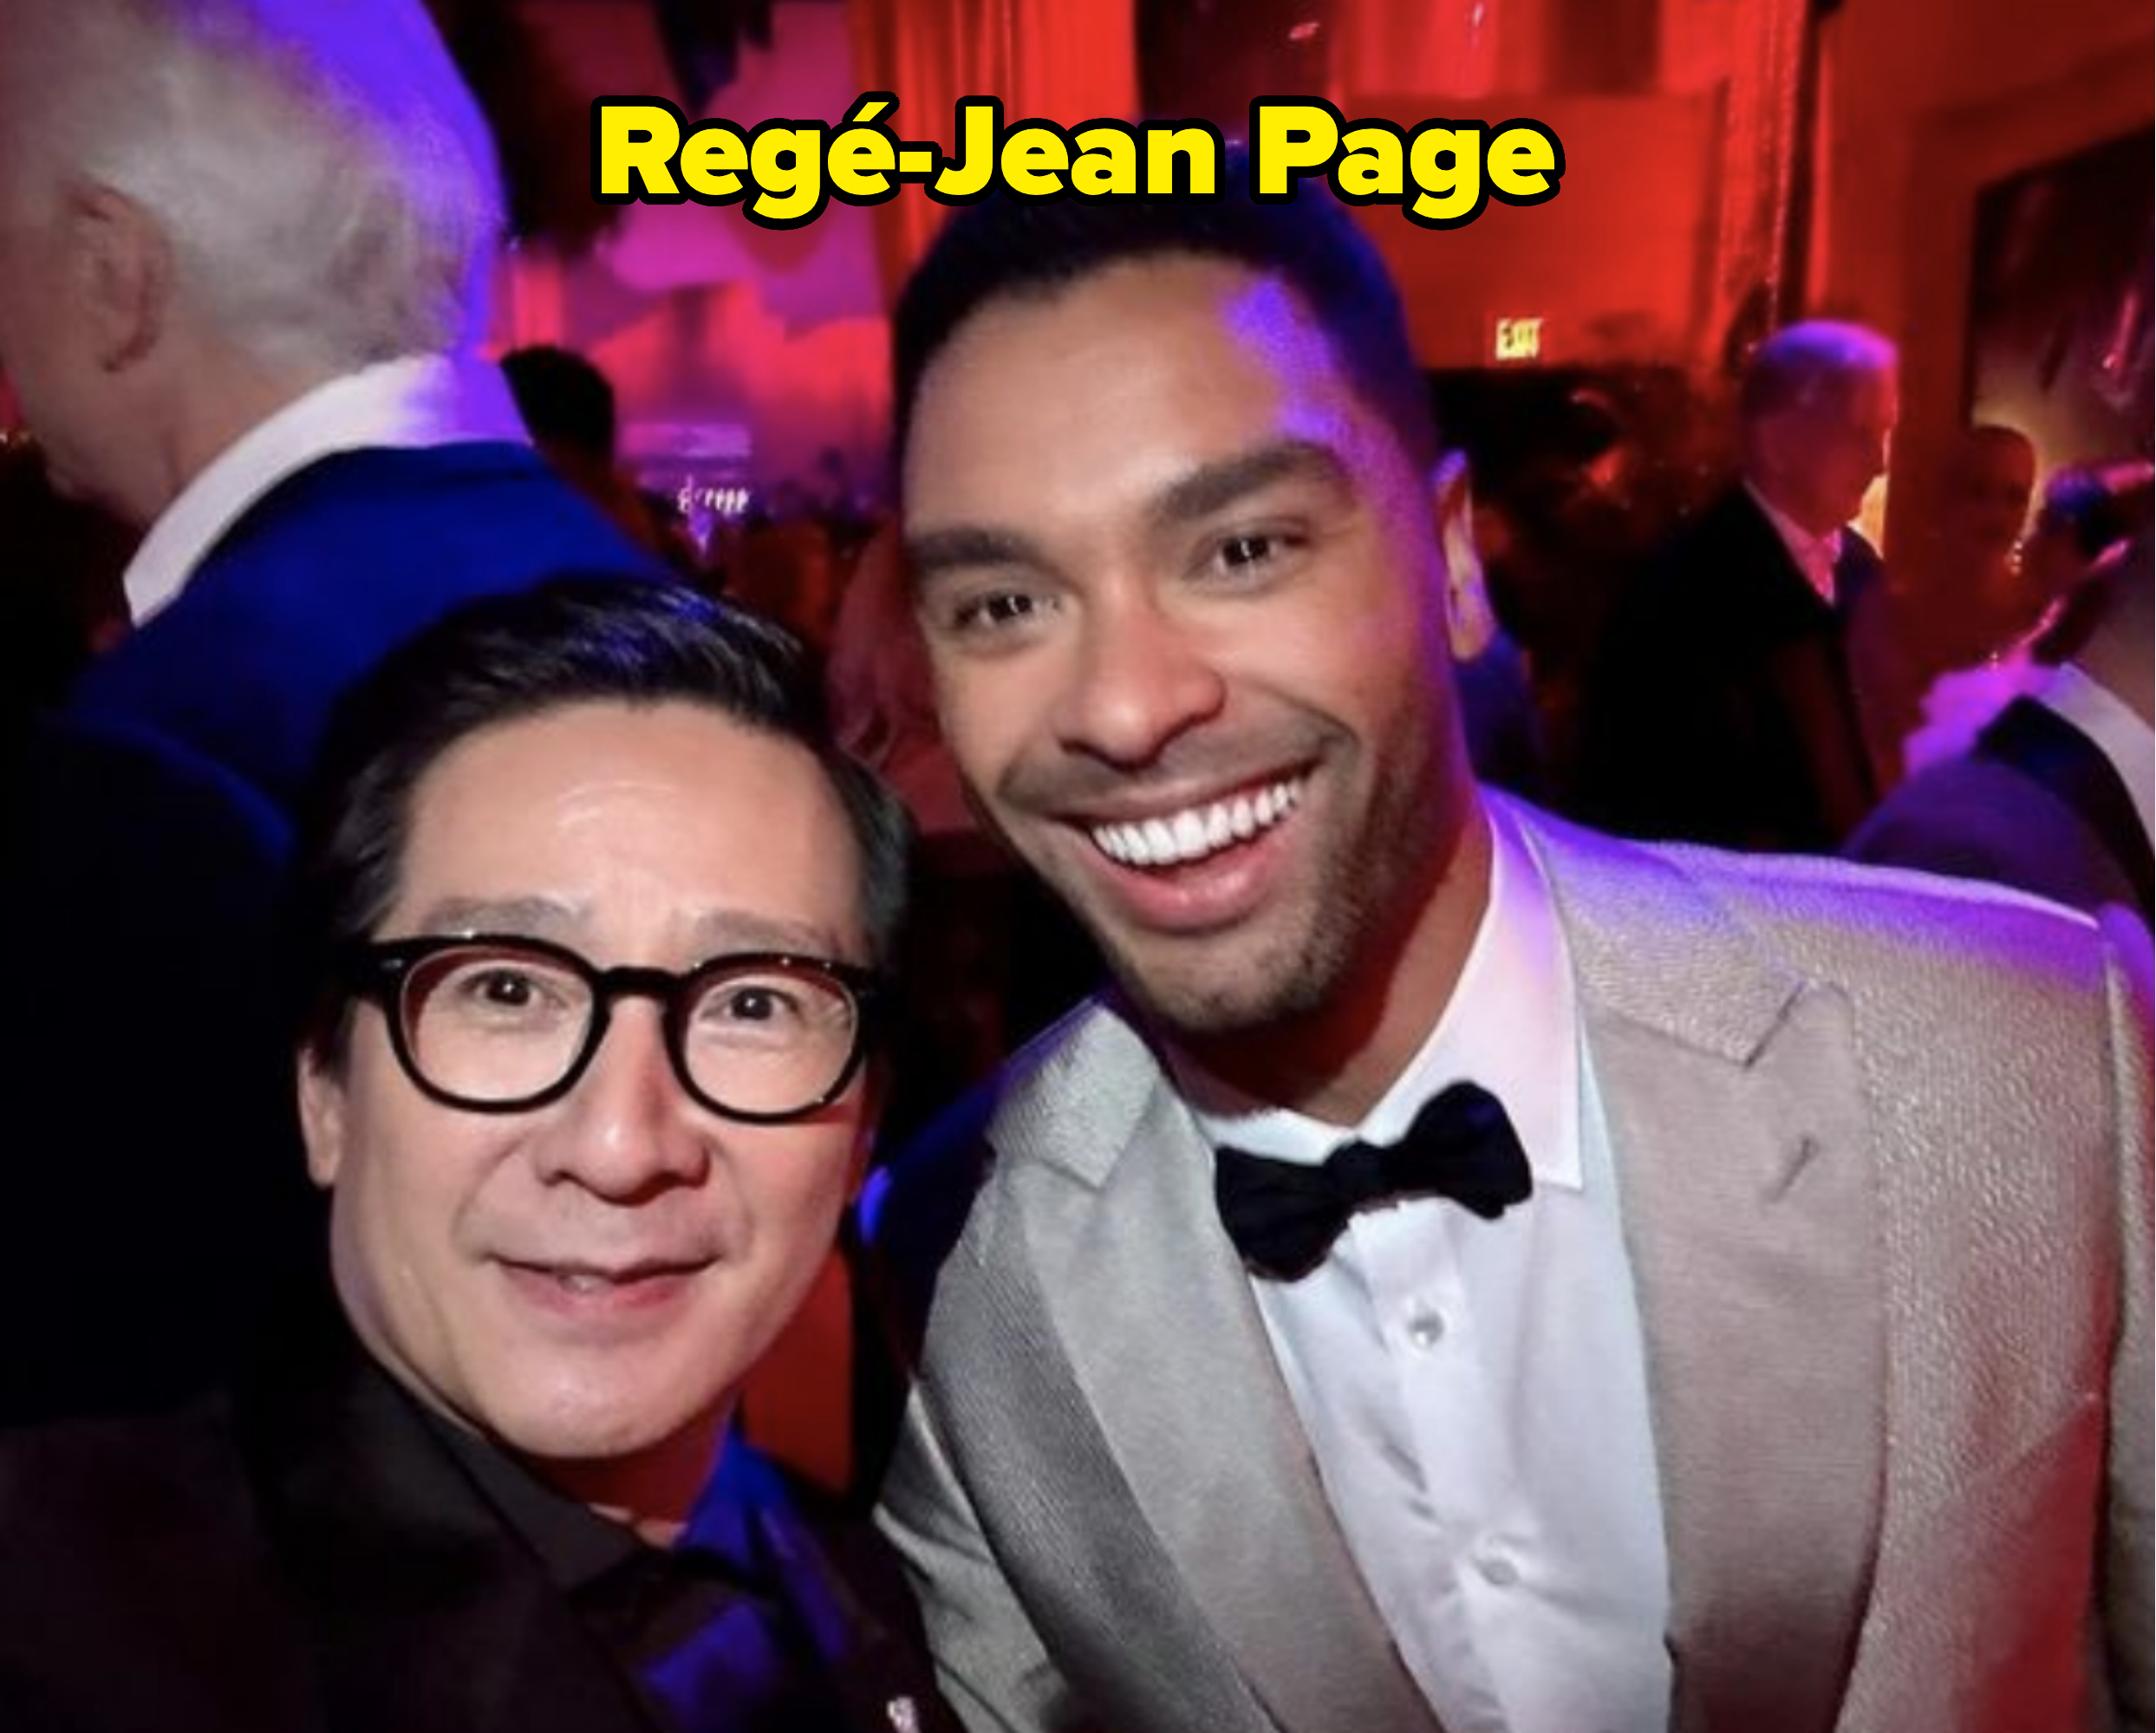 Two men smiling for a selfie at a formal event, one in a jacket and bow tie, the other in glasses